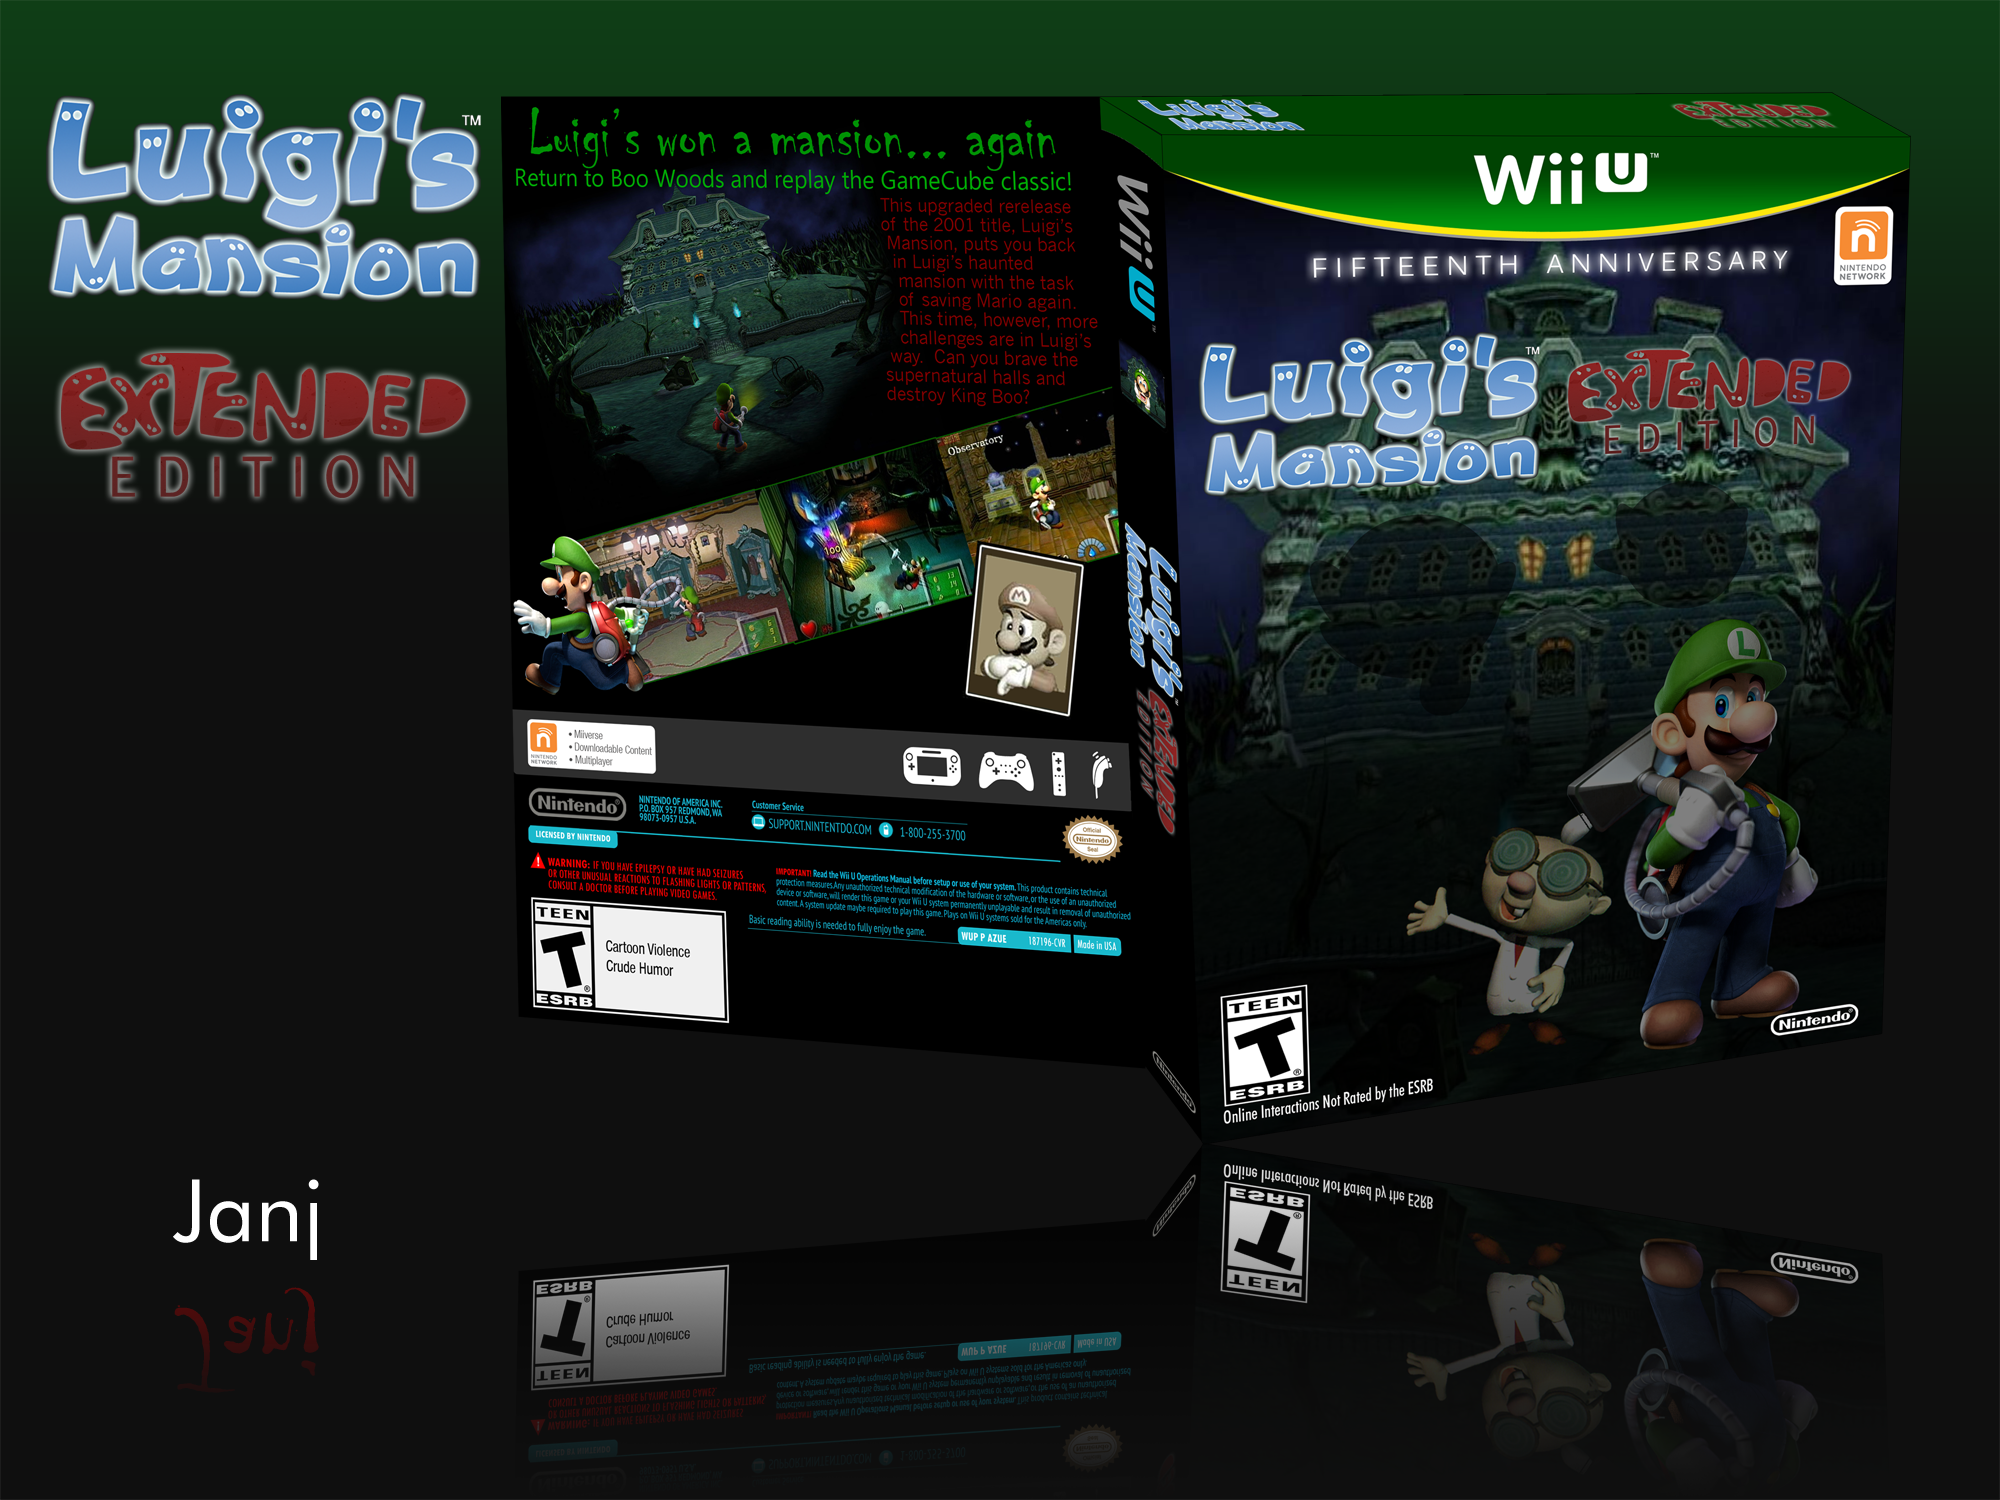 Luigi's Mansion: Extended Edition box cover